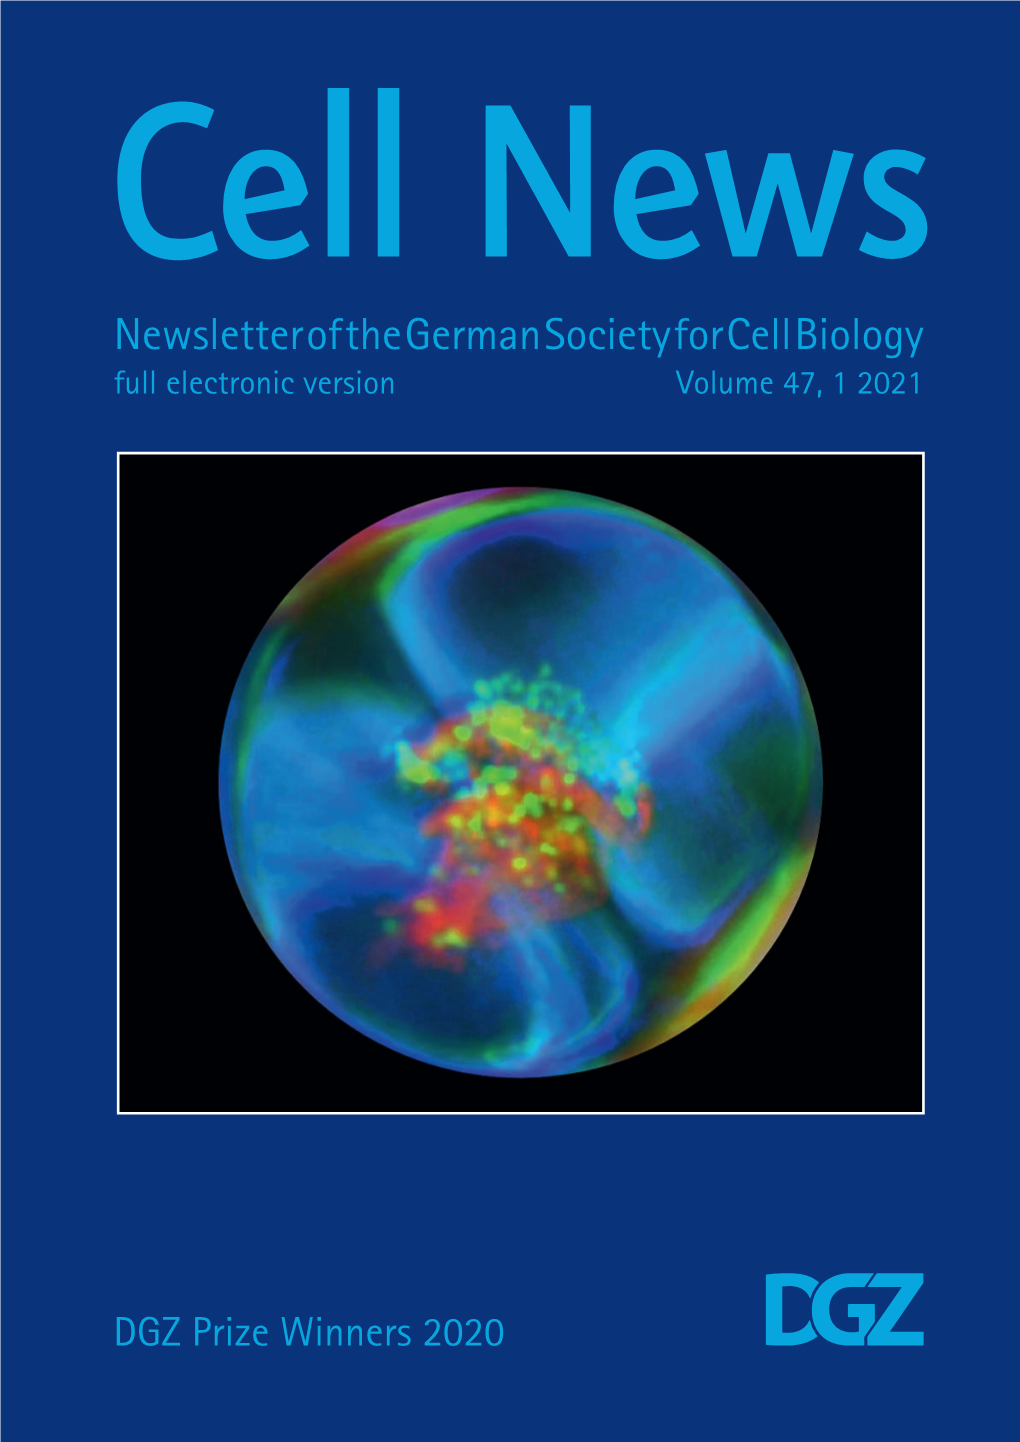 Newsletter of the German Society for Cell Biology Full Electronic Version Volume 47, 1 2021